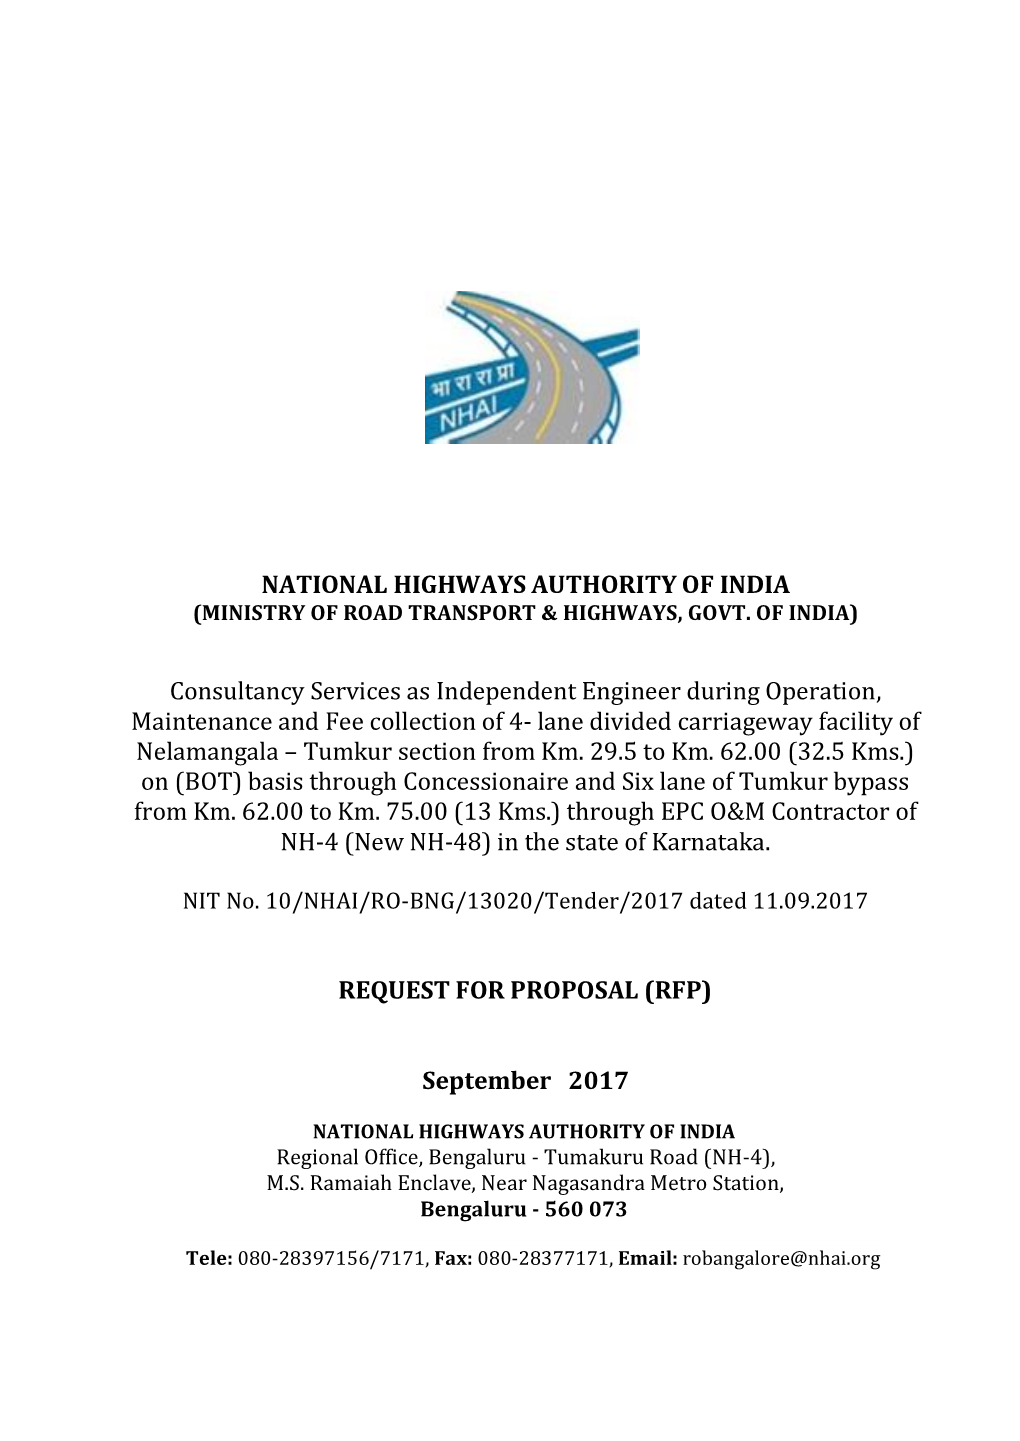 NATIONAL HIGHWAYS AUTHORITY of INDIA Consultancy Services As